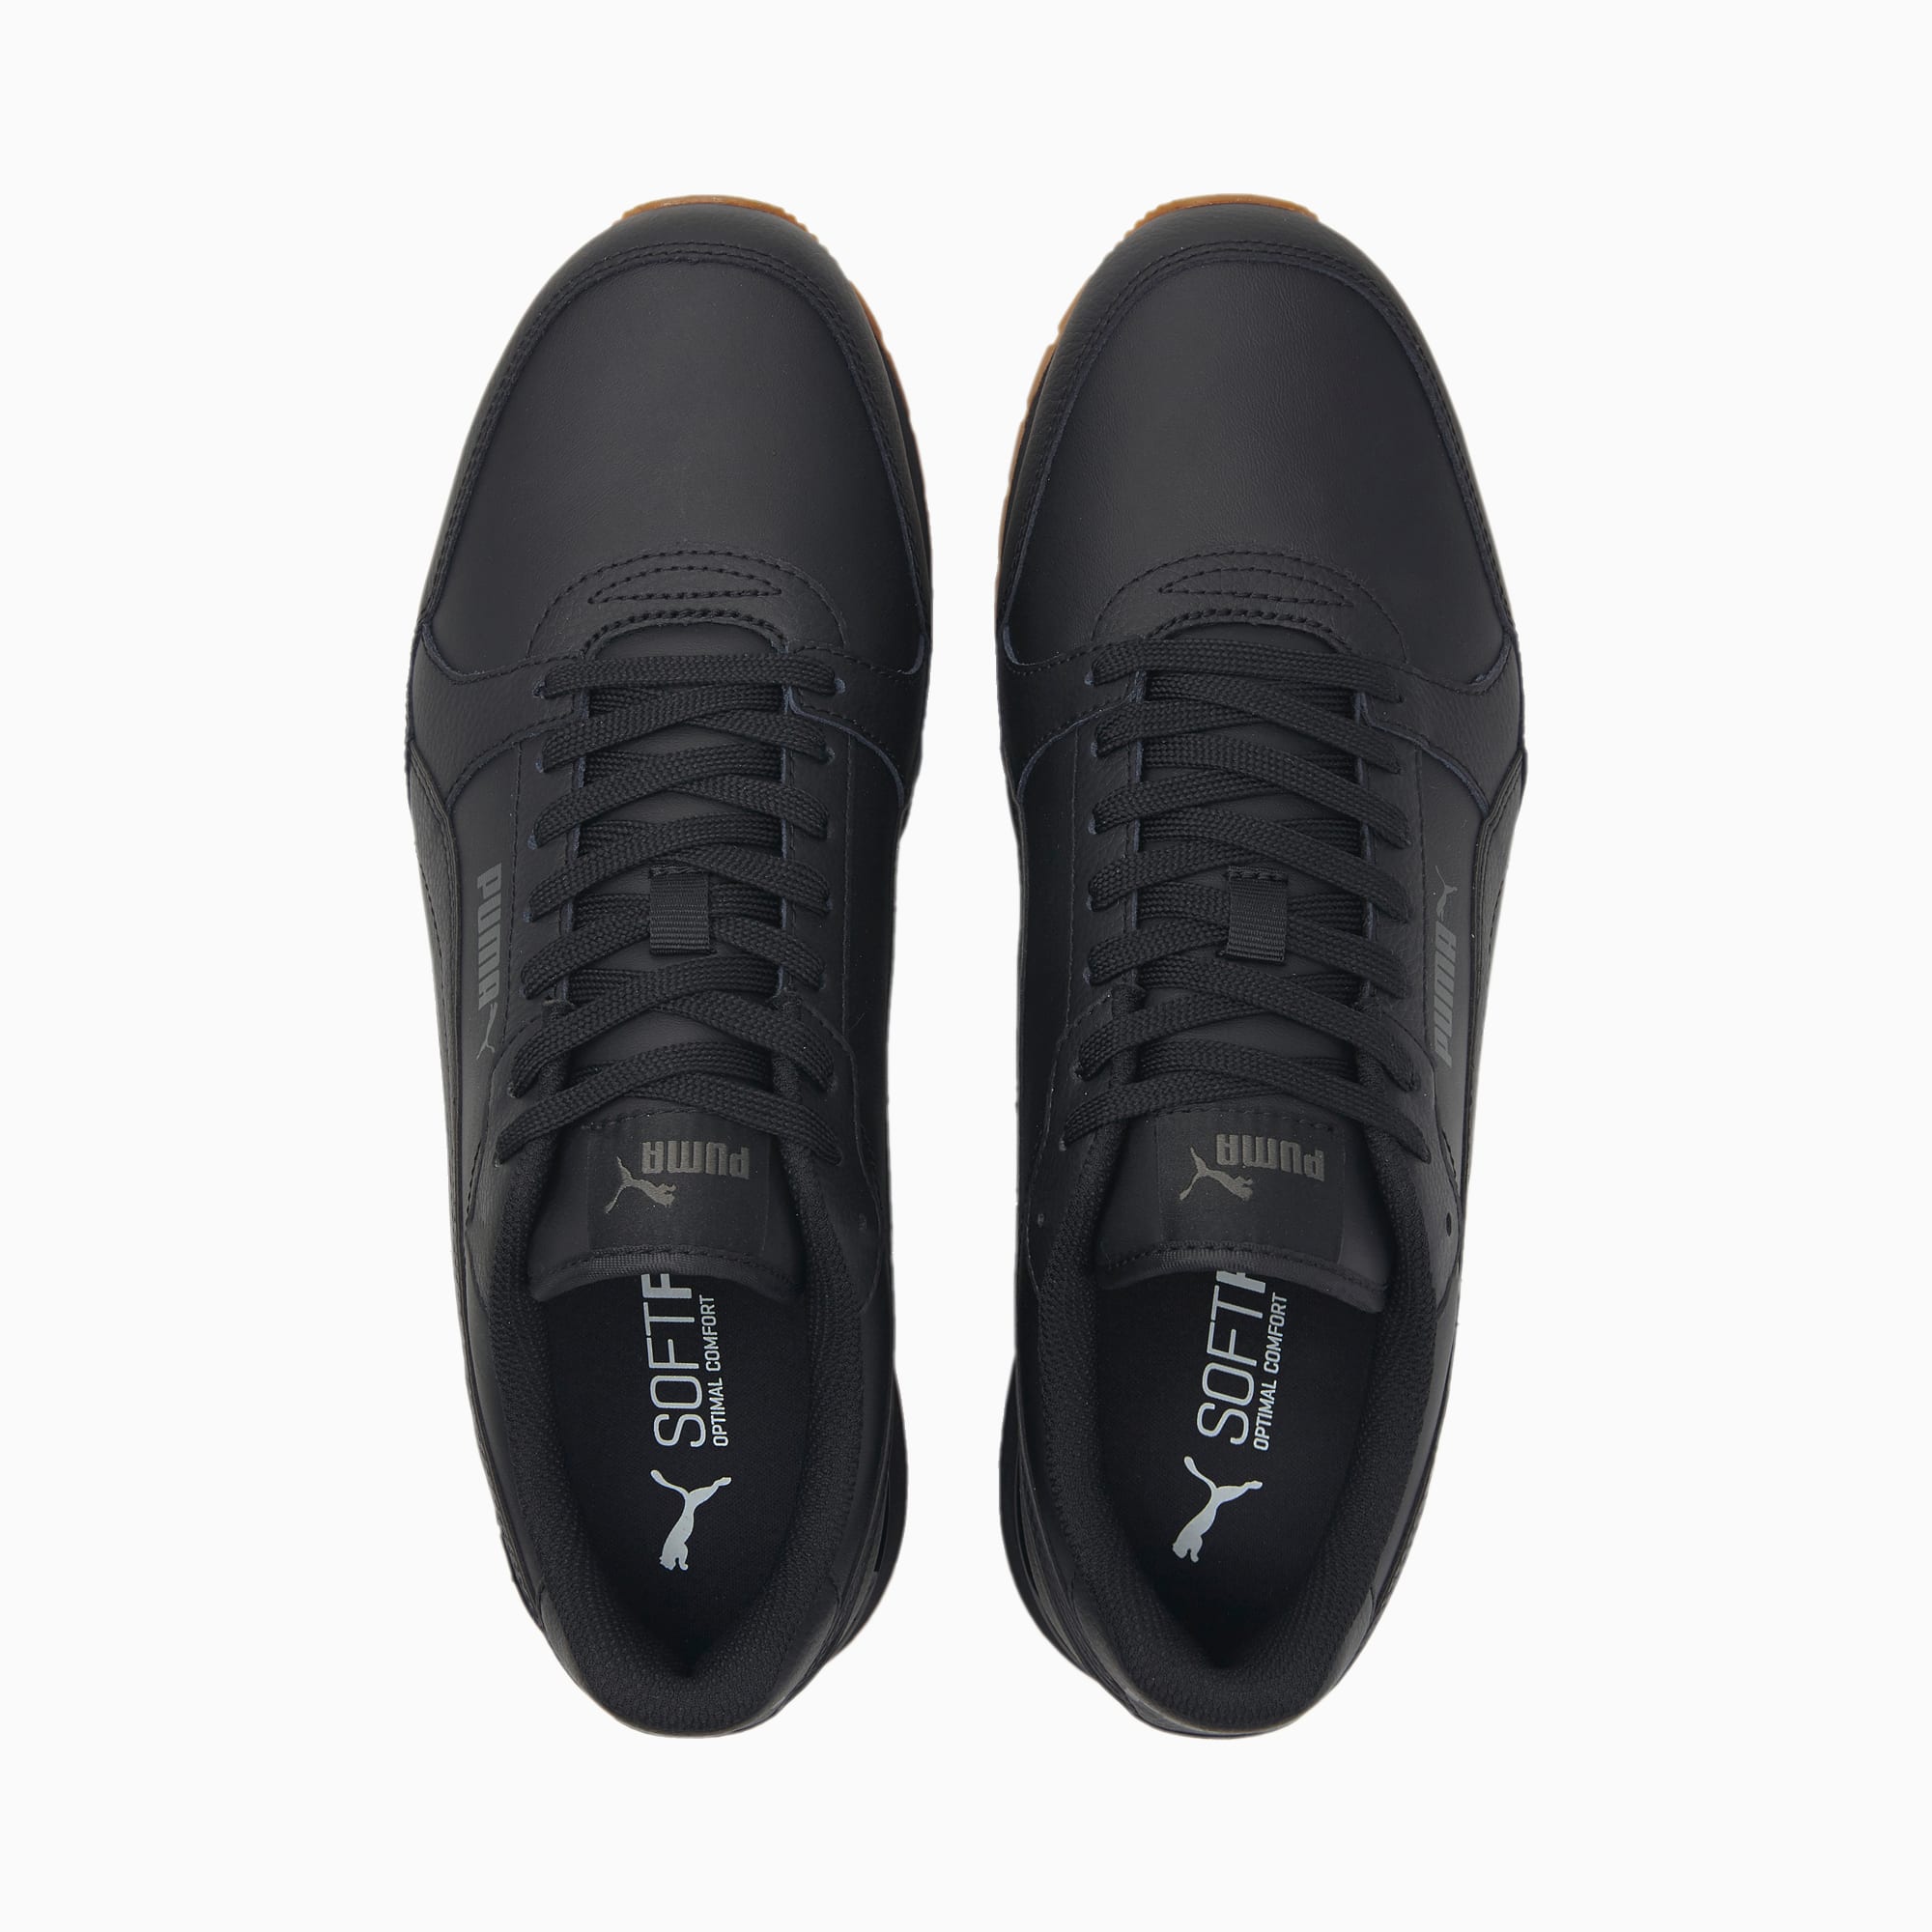 PUMA ST Runner V3 low-top Sneakers - Farfetch